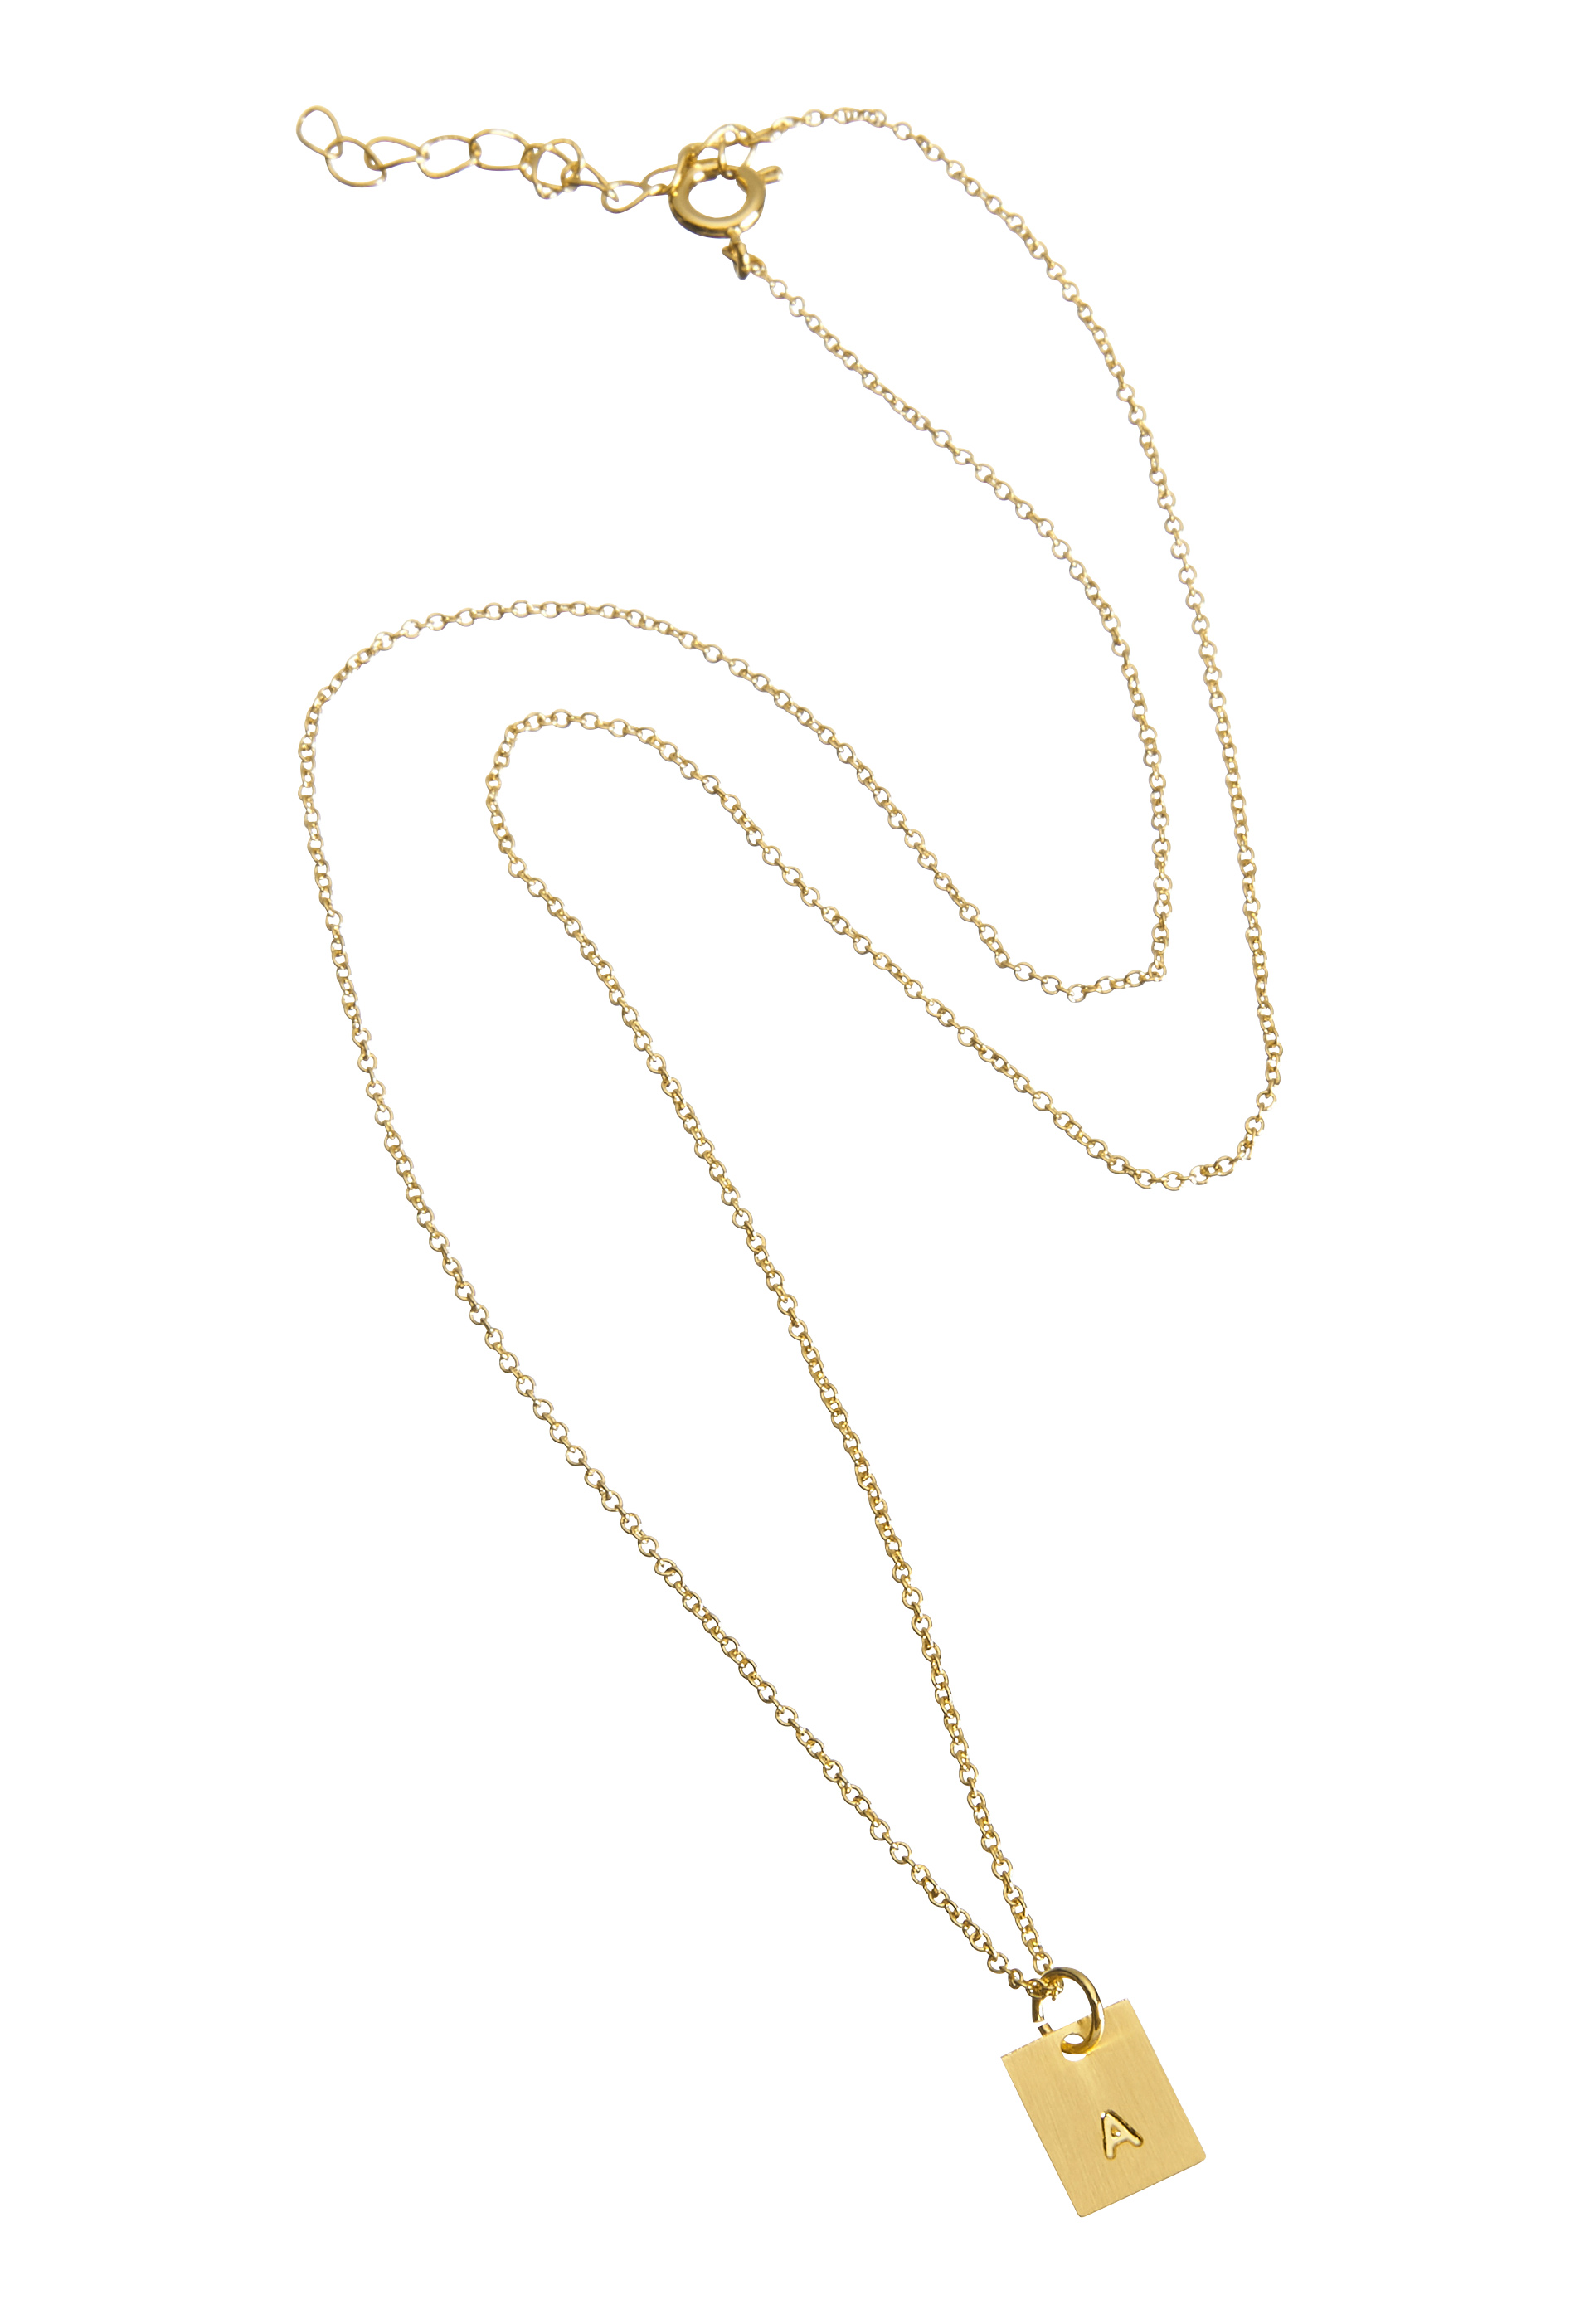 NORR by Personal Story Necklace Gold -